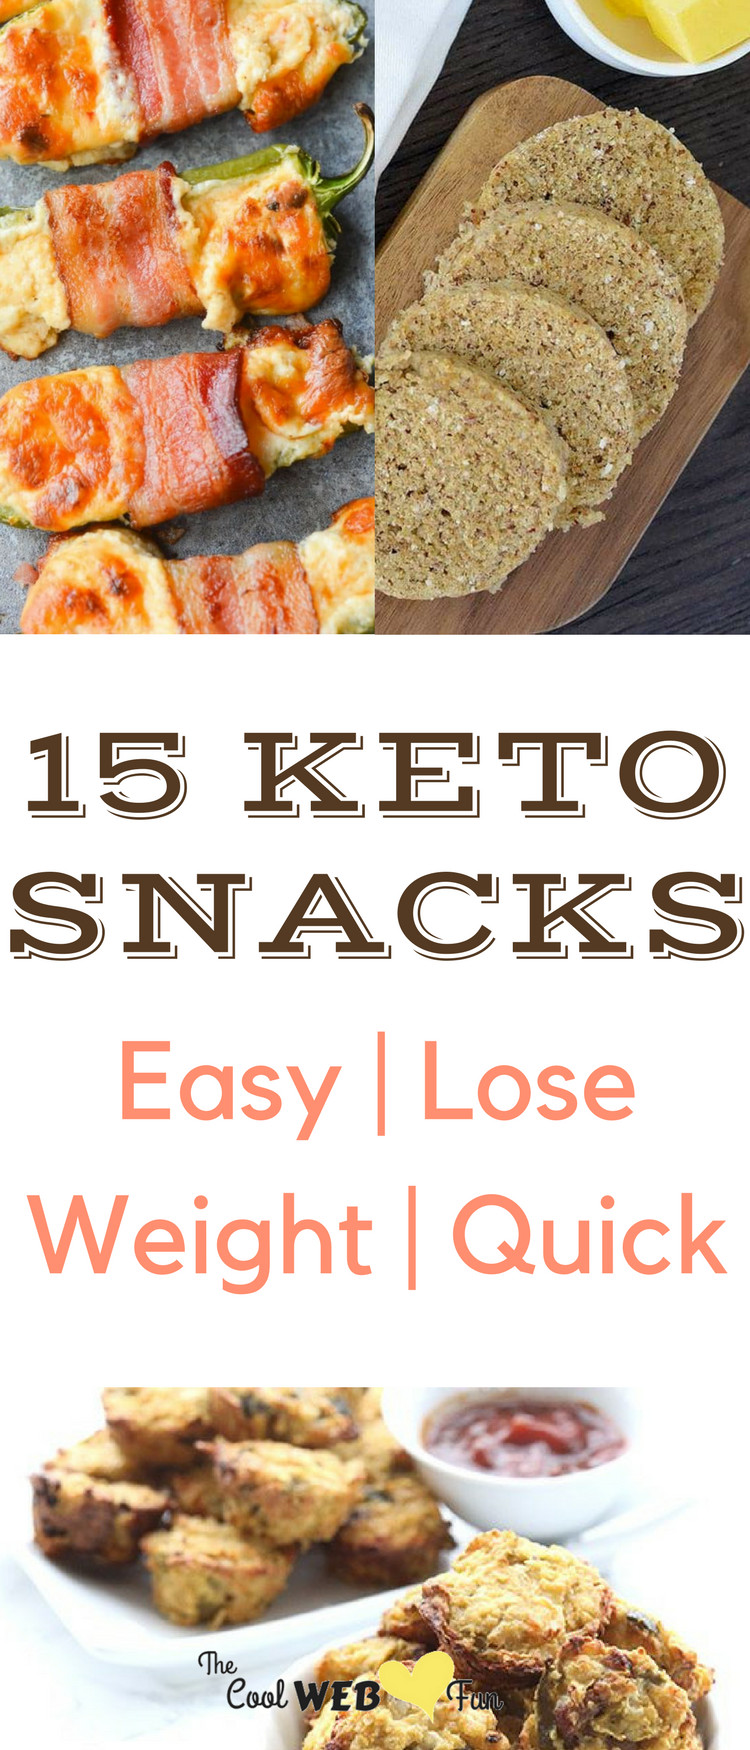 Low Carb Keto Snacks Easy
 15 Easy Low Carb Keto Snacks that will help you Lose